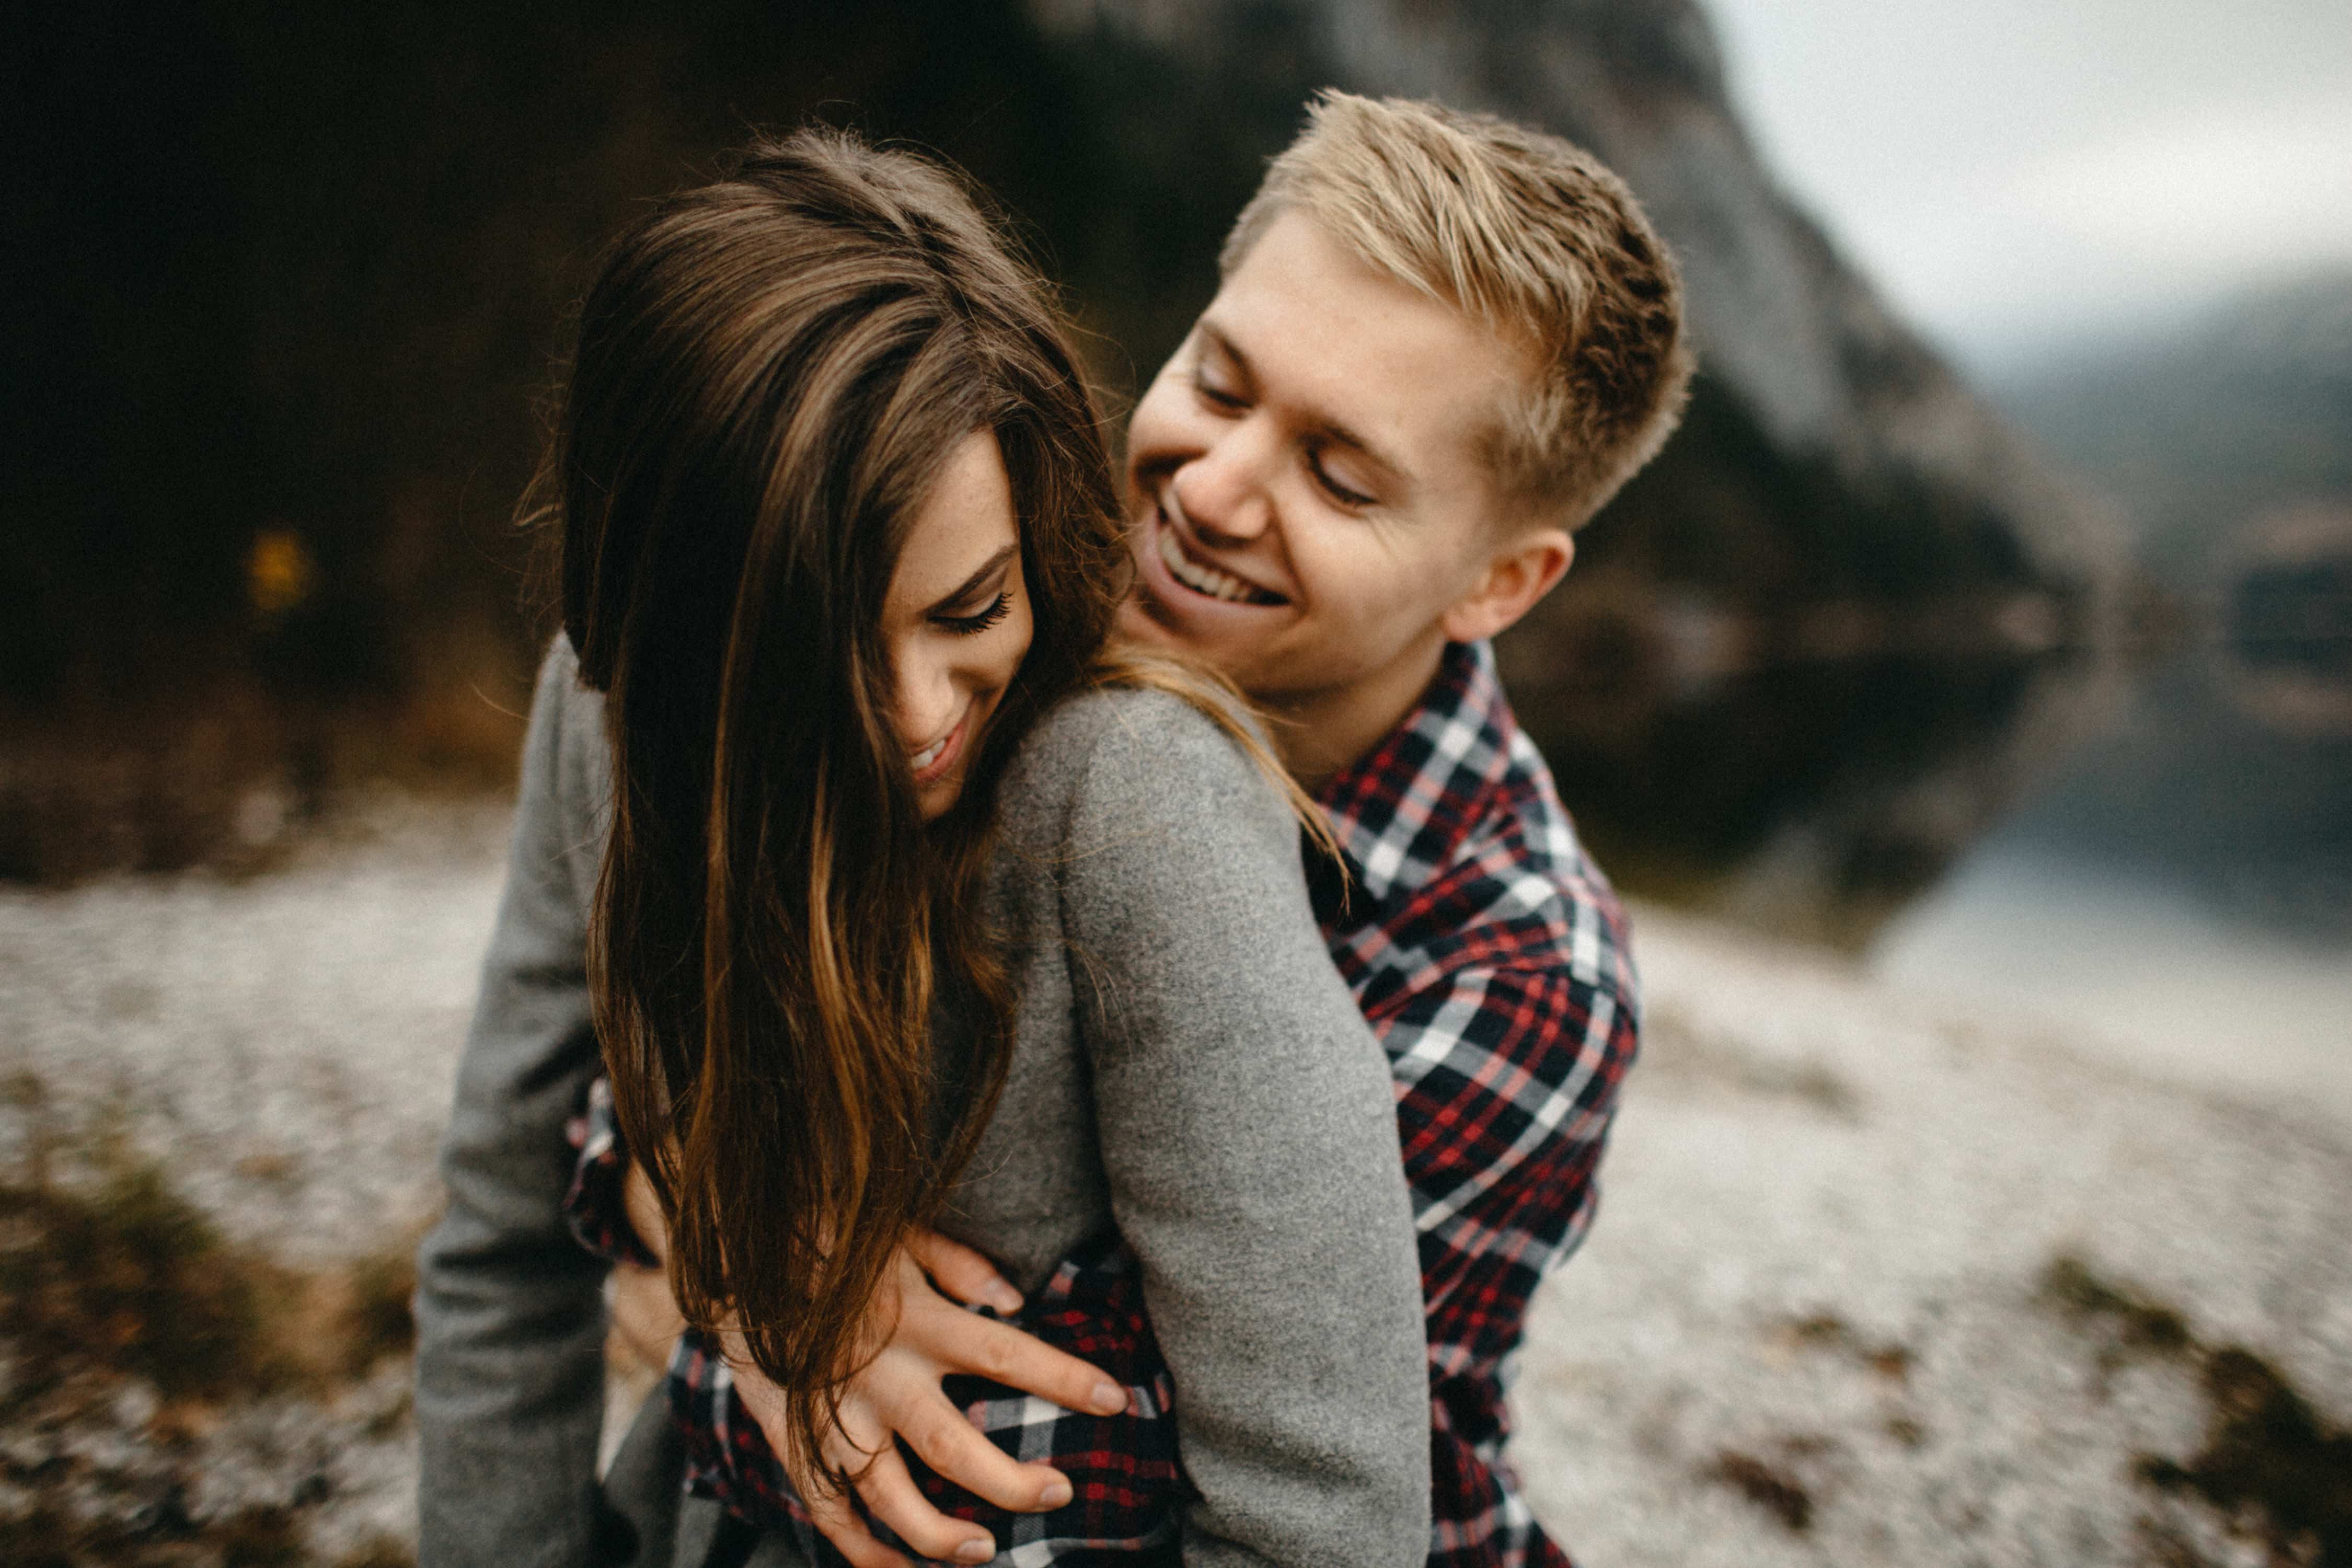 How To Take The Best Engagement Photos